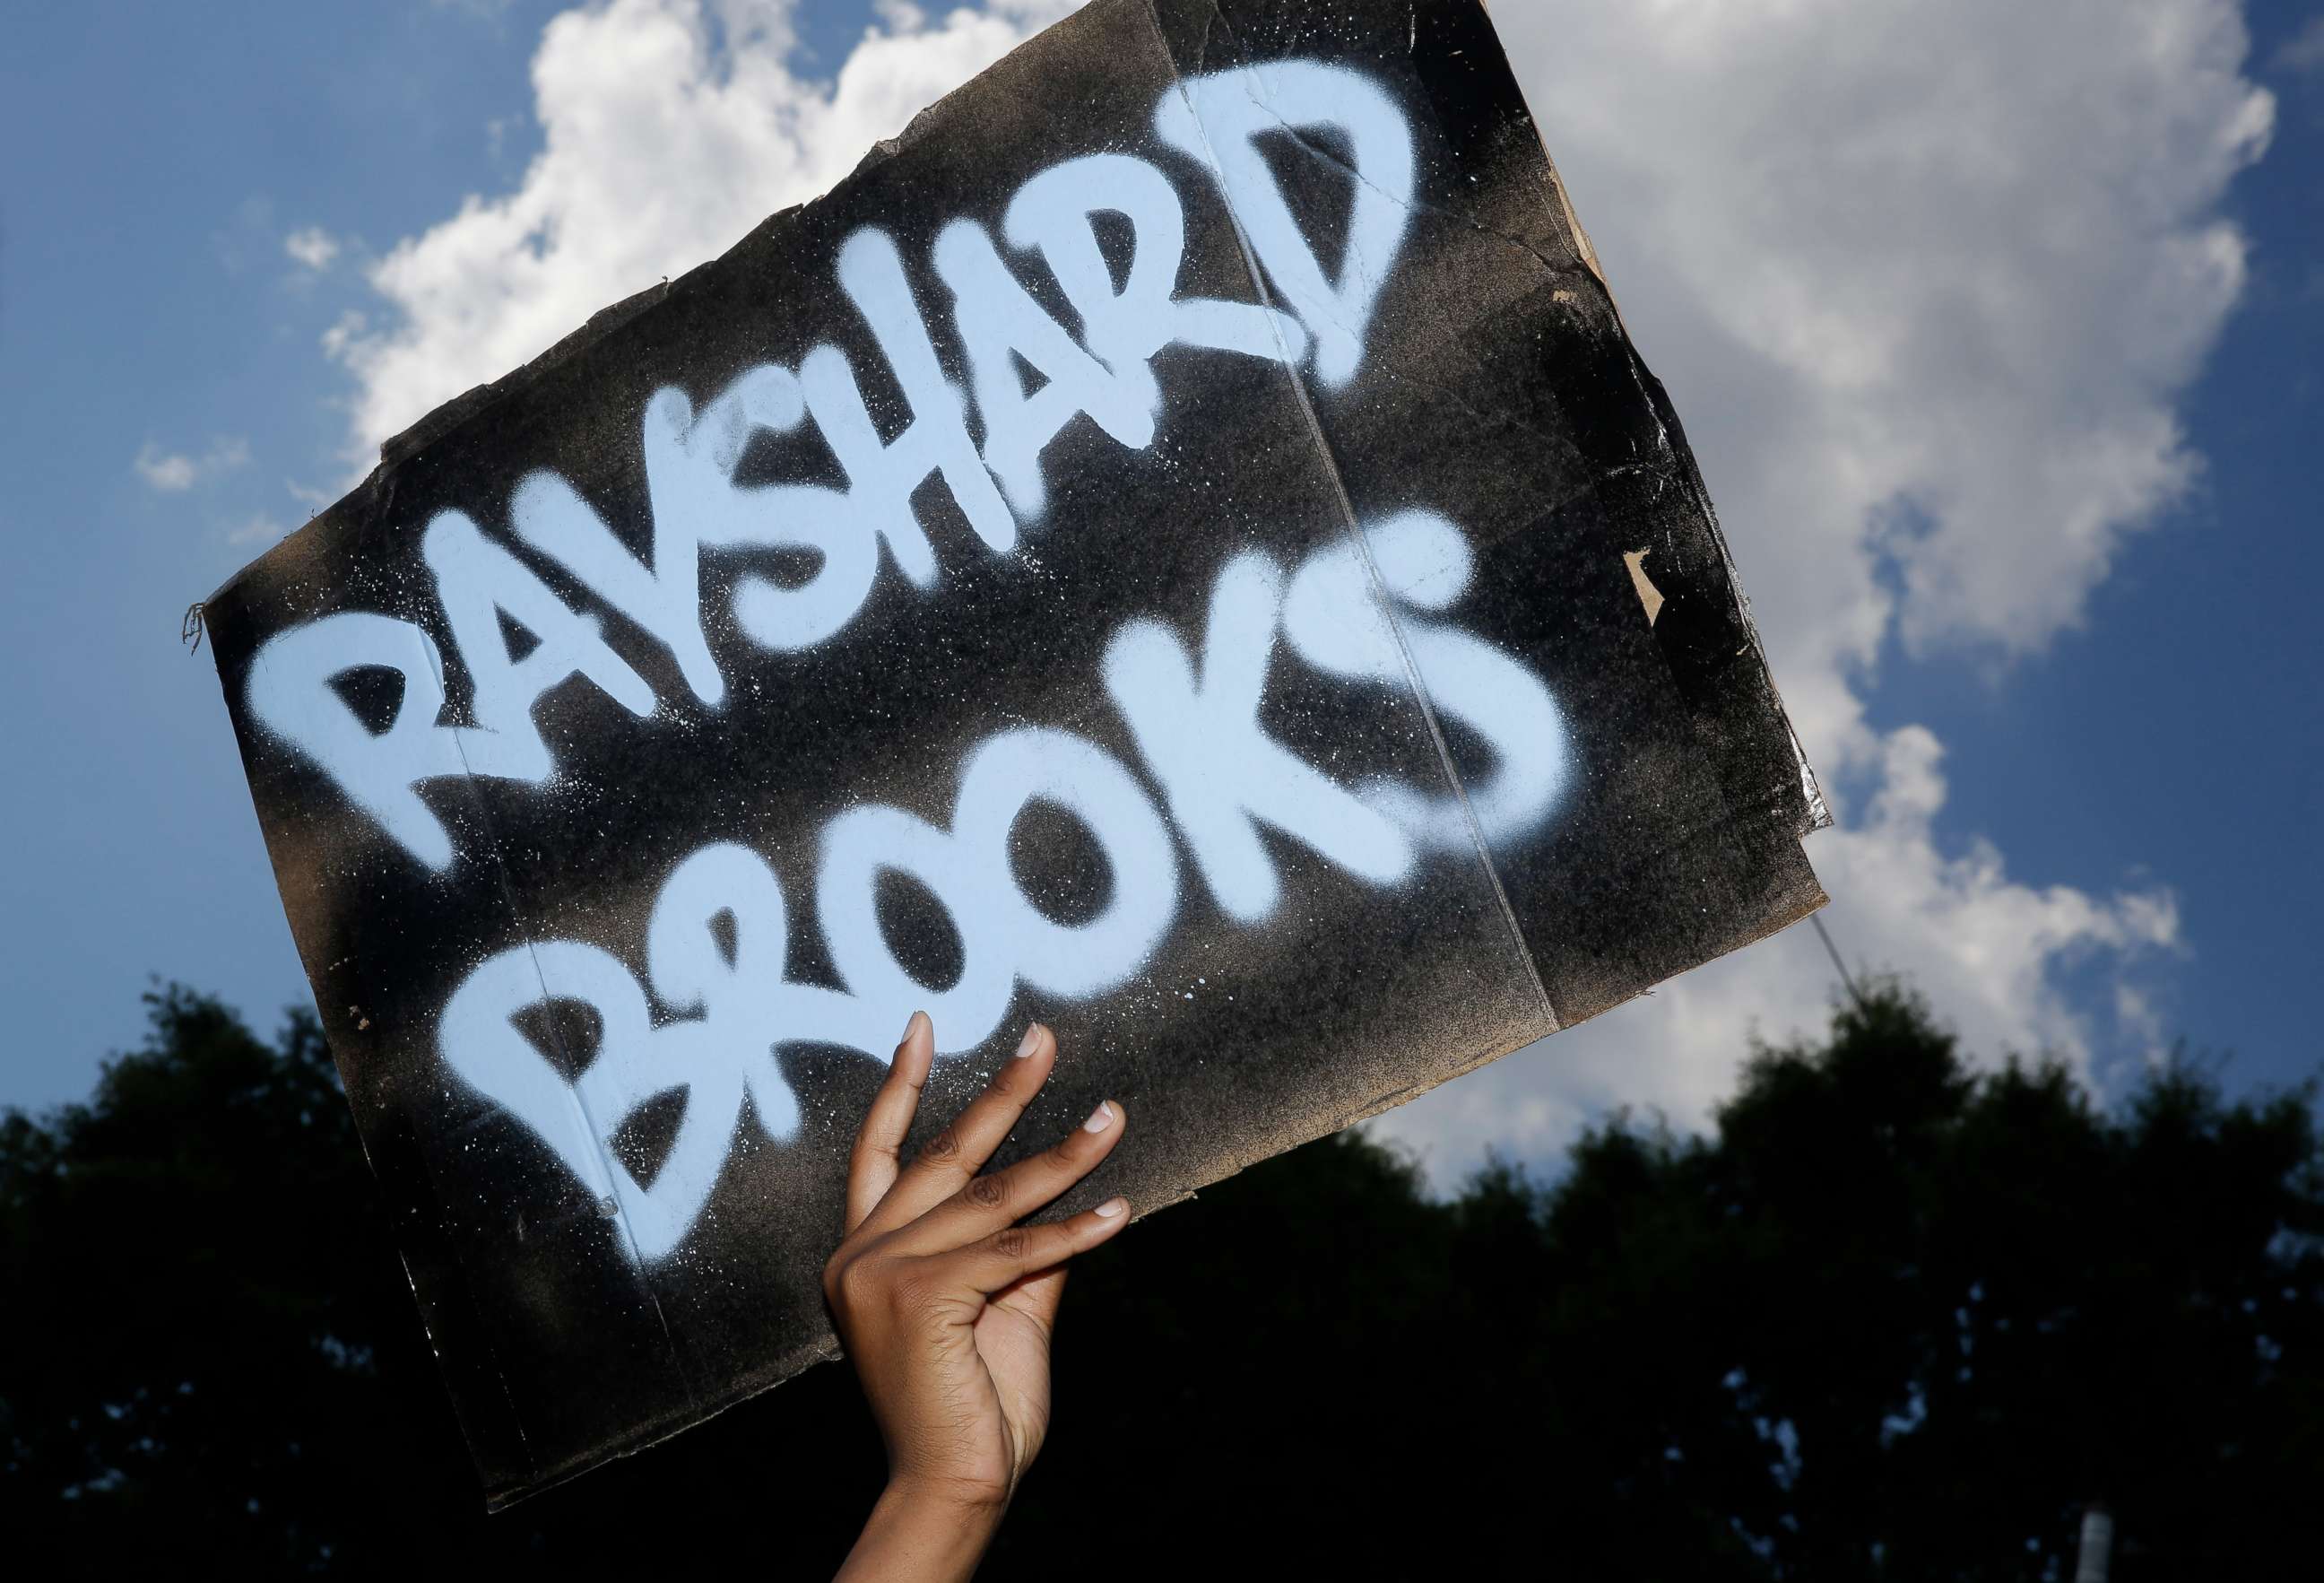 PHOTO: A protester holds up a sign on Saturday, June 13, 2020, near the Wendy's restaurant where Rayshard Brooks was shot and killed by police Friday evening following a struggle in the restaurant's drive-thru line in Atlanta.